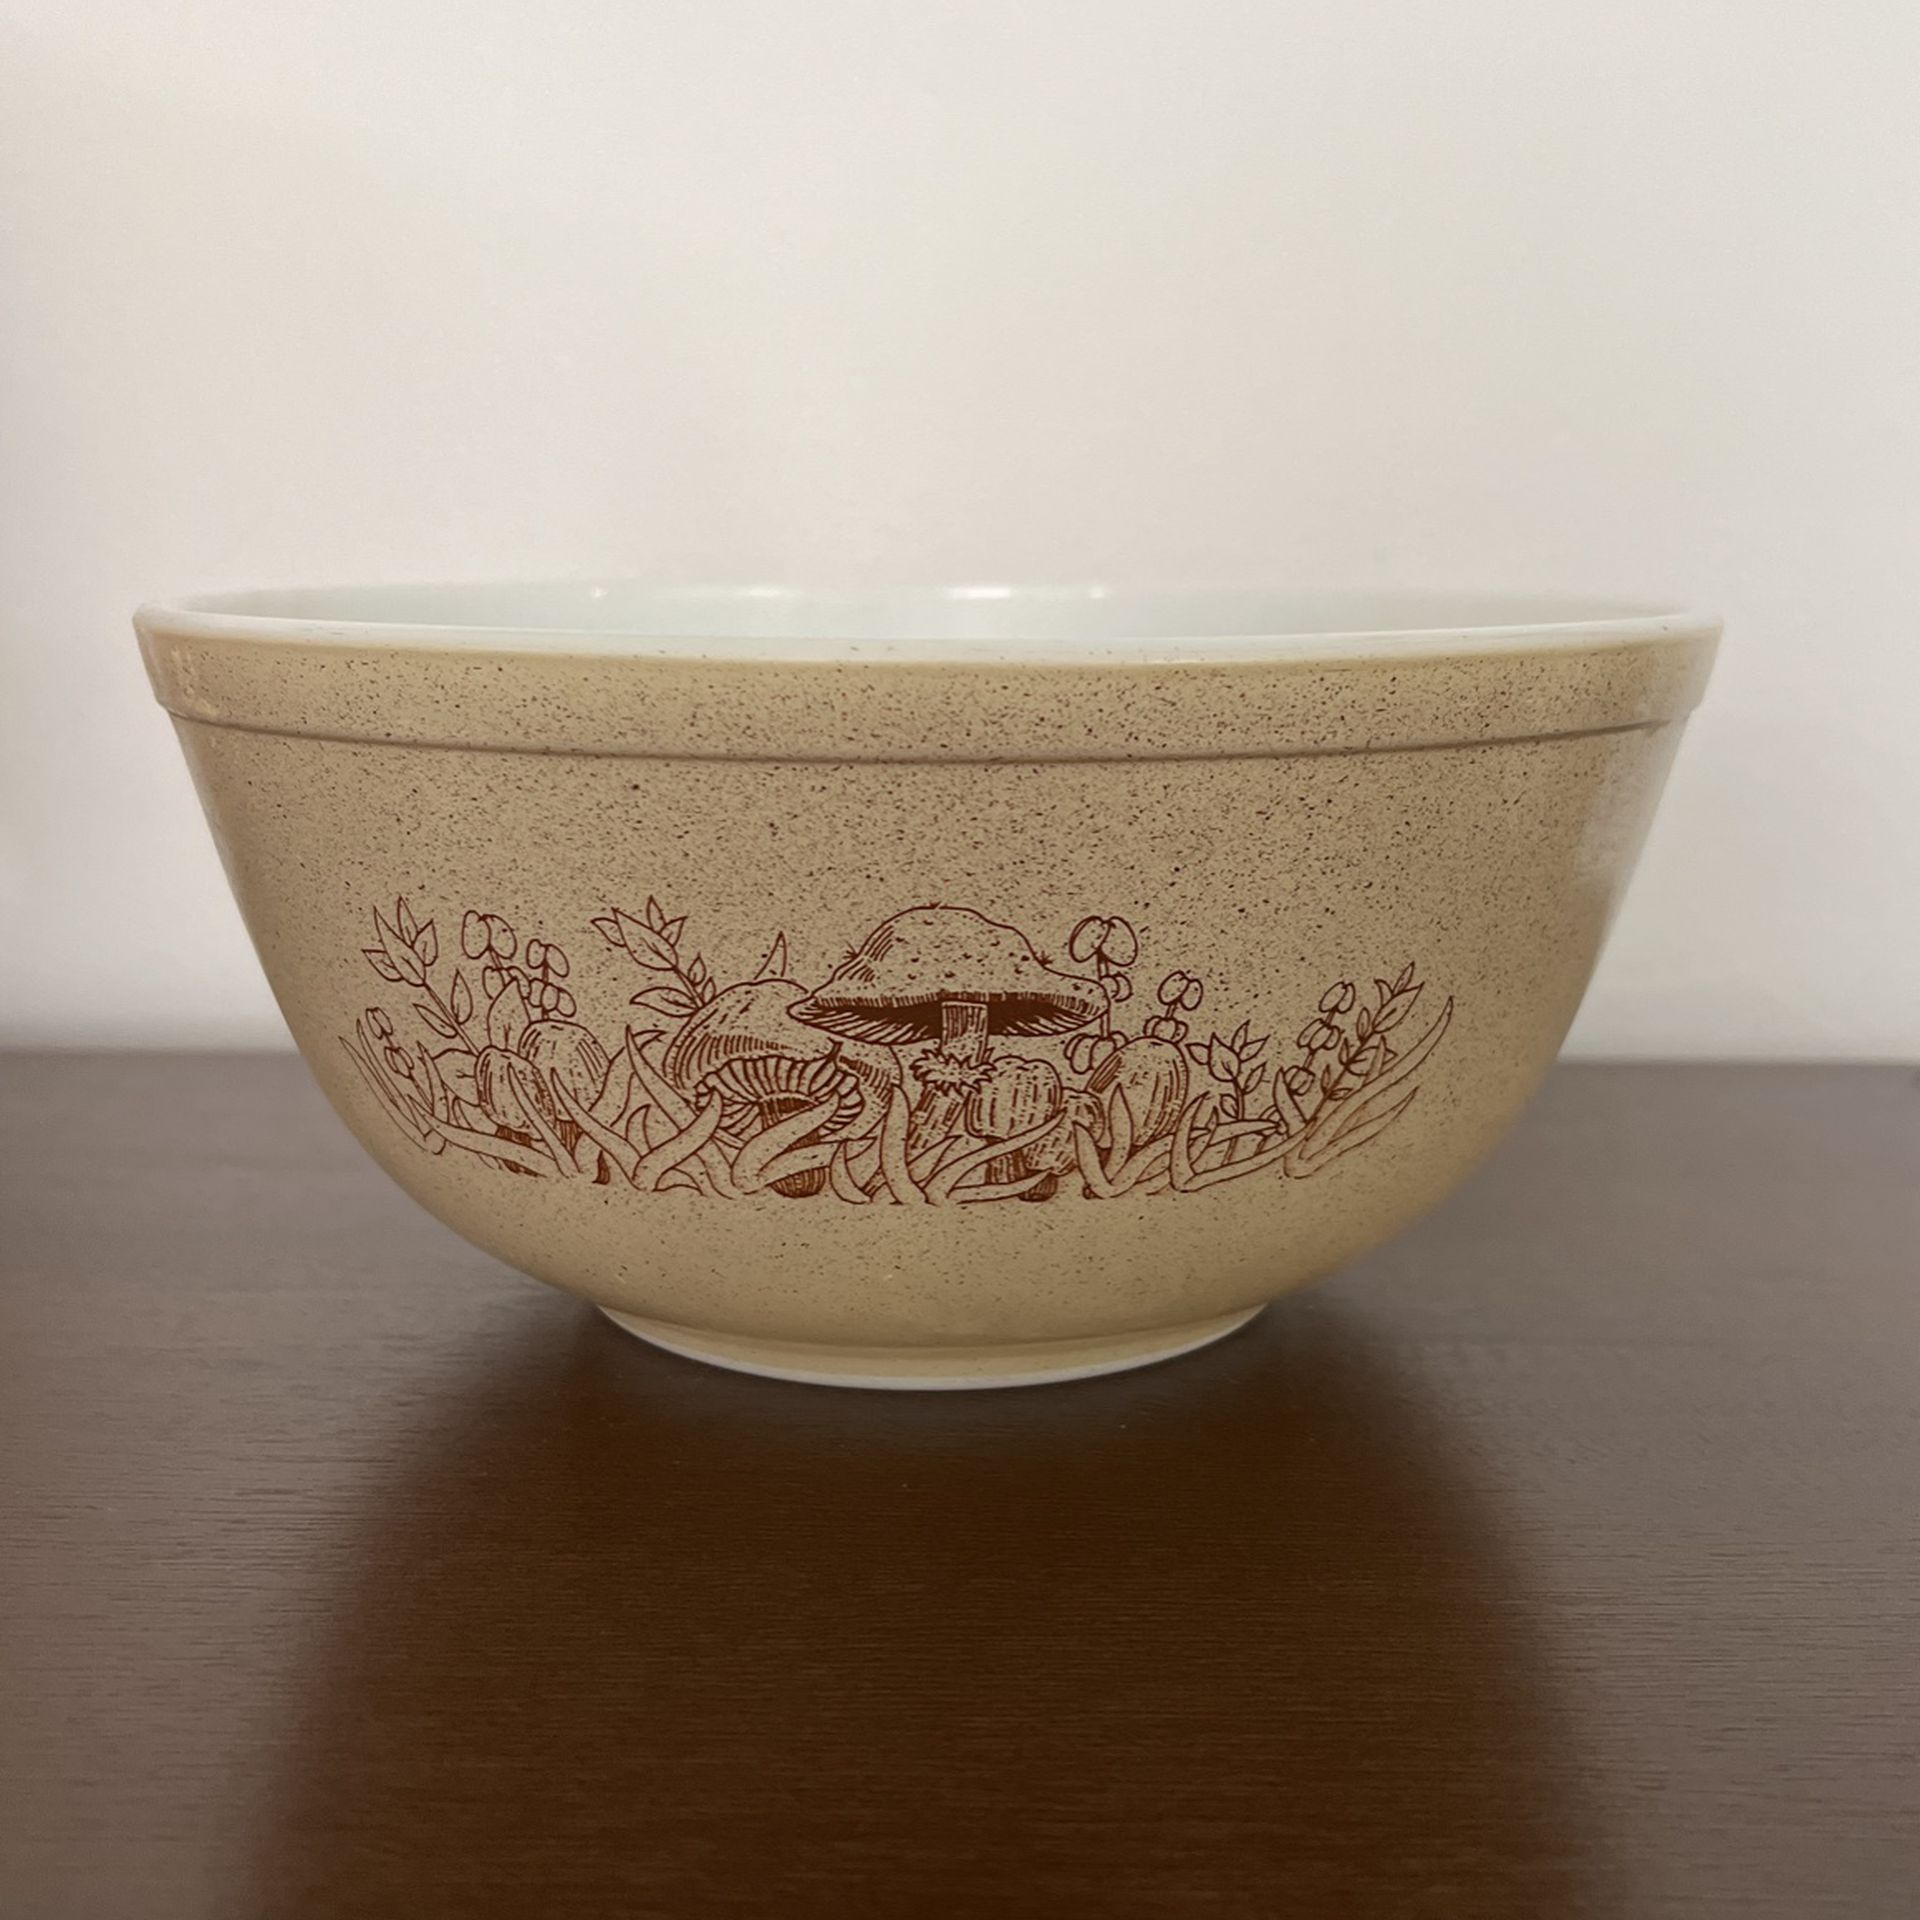 PYREX Forest Fancies 403 8” 2.5 Quart Mixing Bowl, 1980s Collectible White Glass Beige Speckled Mushroom Toadstool Corning